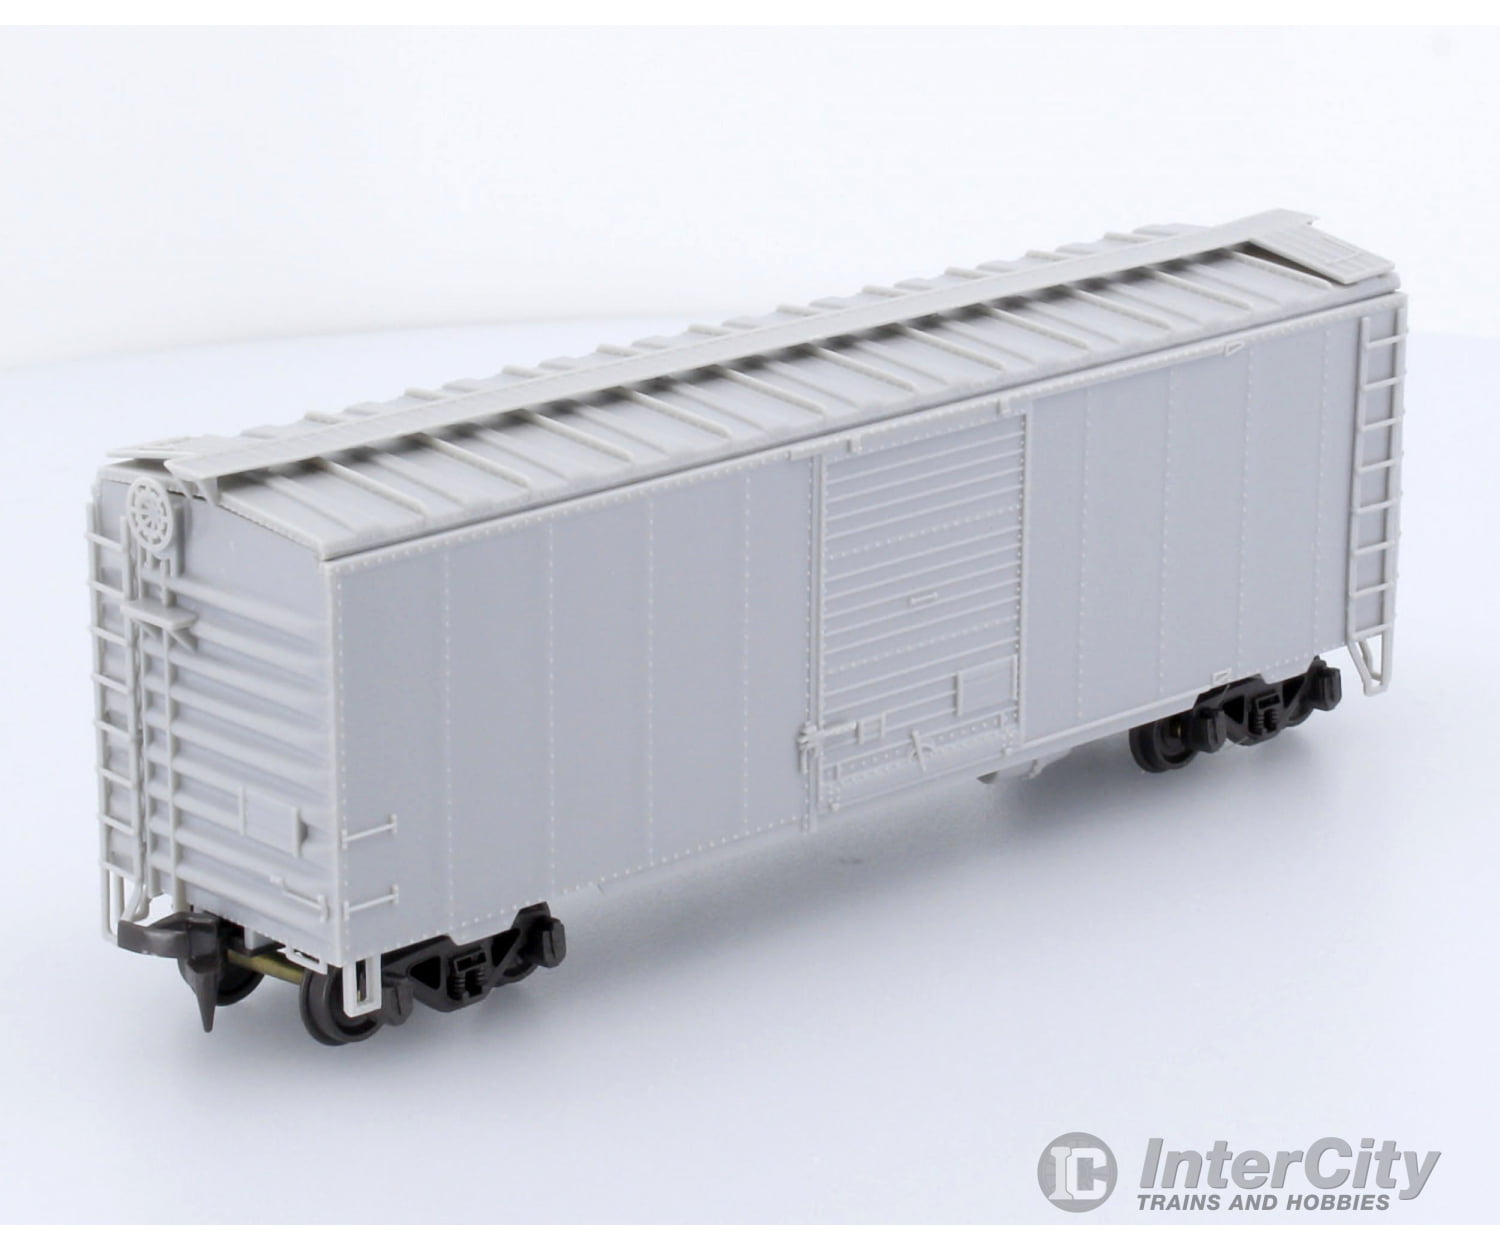 Trains Canada Ho Scale Undecorated 40 Nsc Box Car Freight Cars